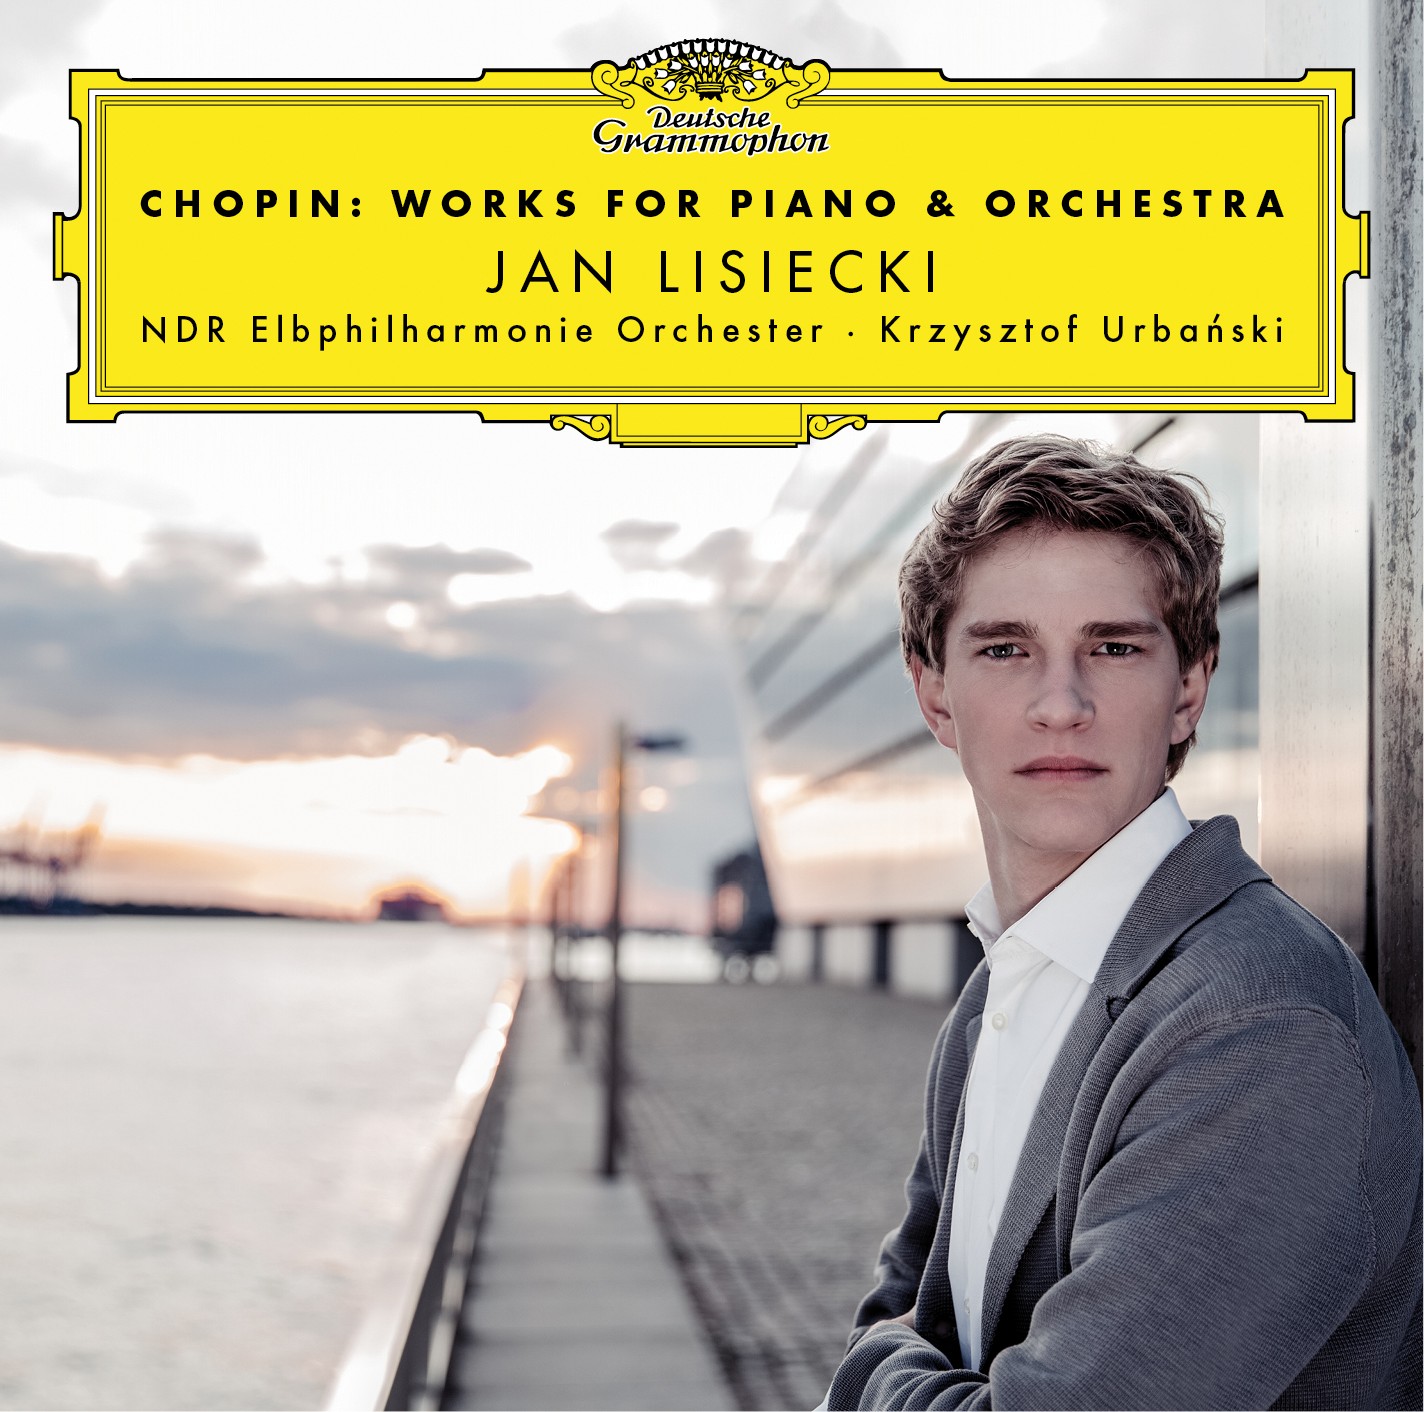 CD Shop - CHOPIN, FREDERIC WORKS FOR PIANO & ORCHESTRA